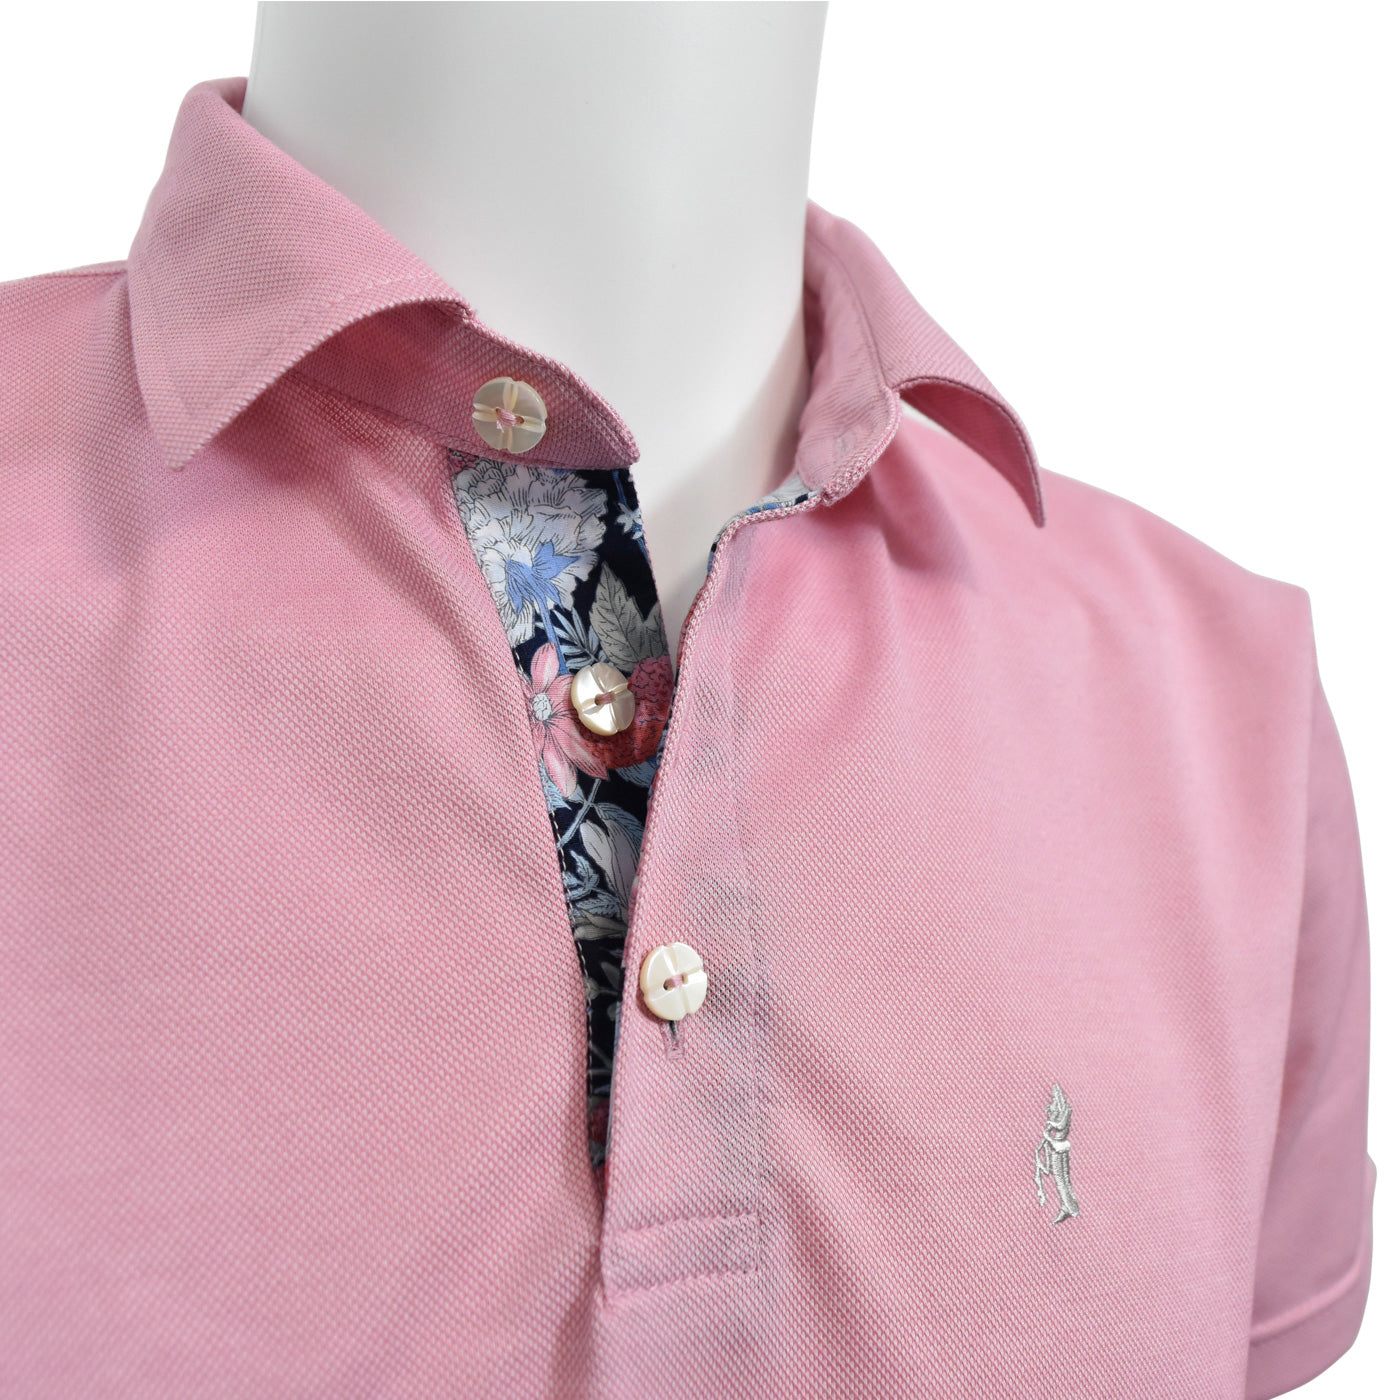 Polo shirt men's vintage floral with logo embroidery short sleeve made in Japan FORTUNA Tokyo